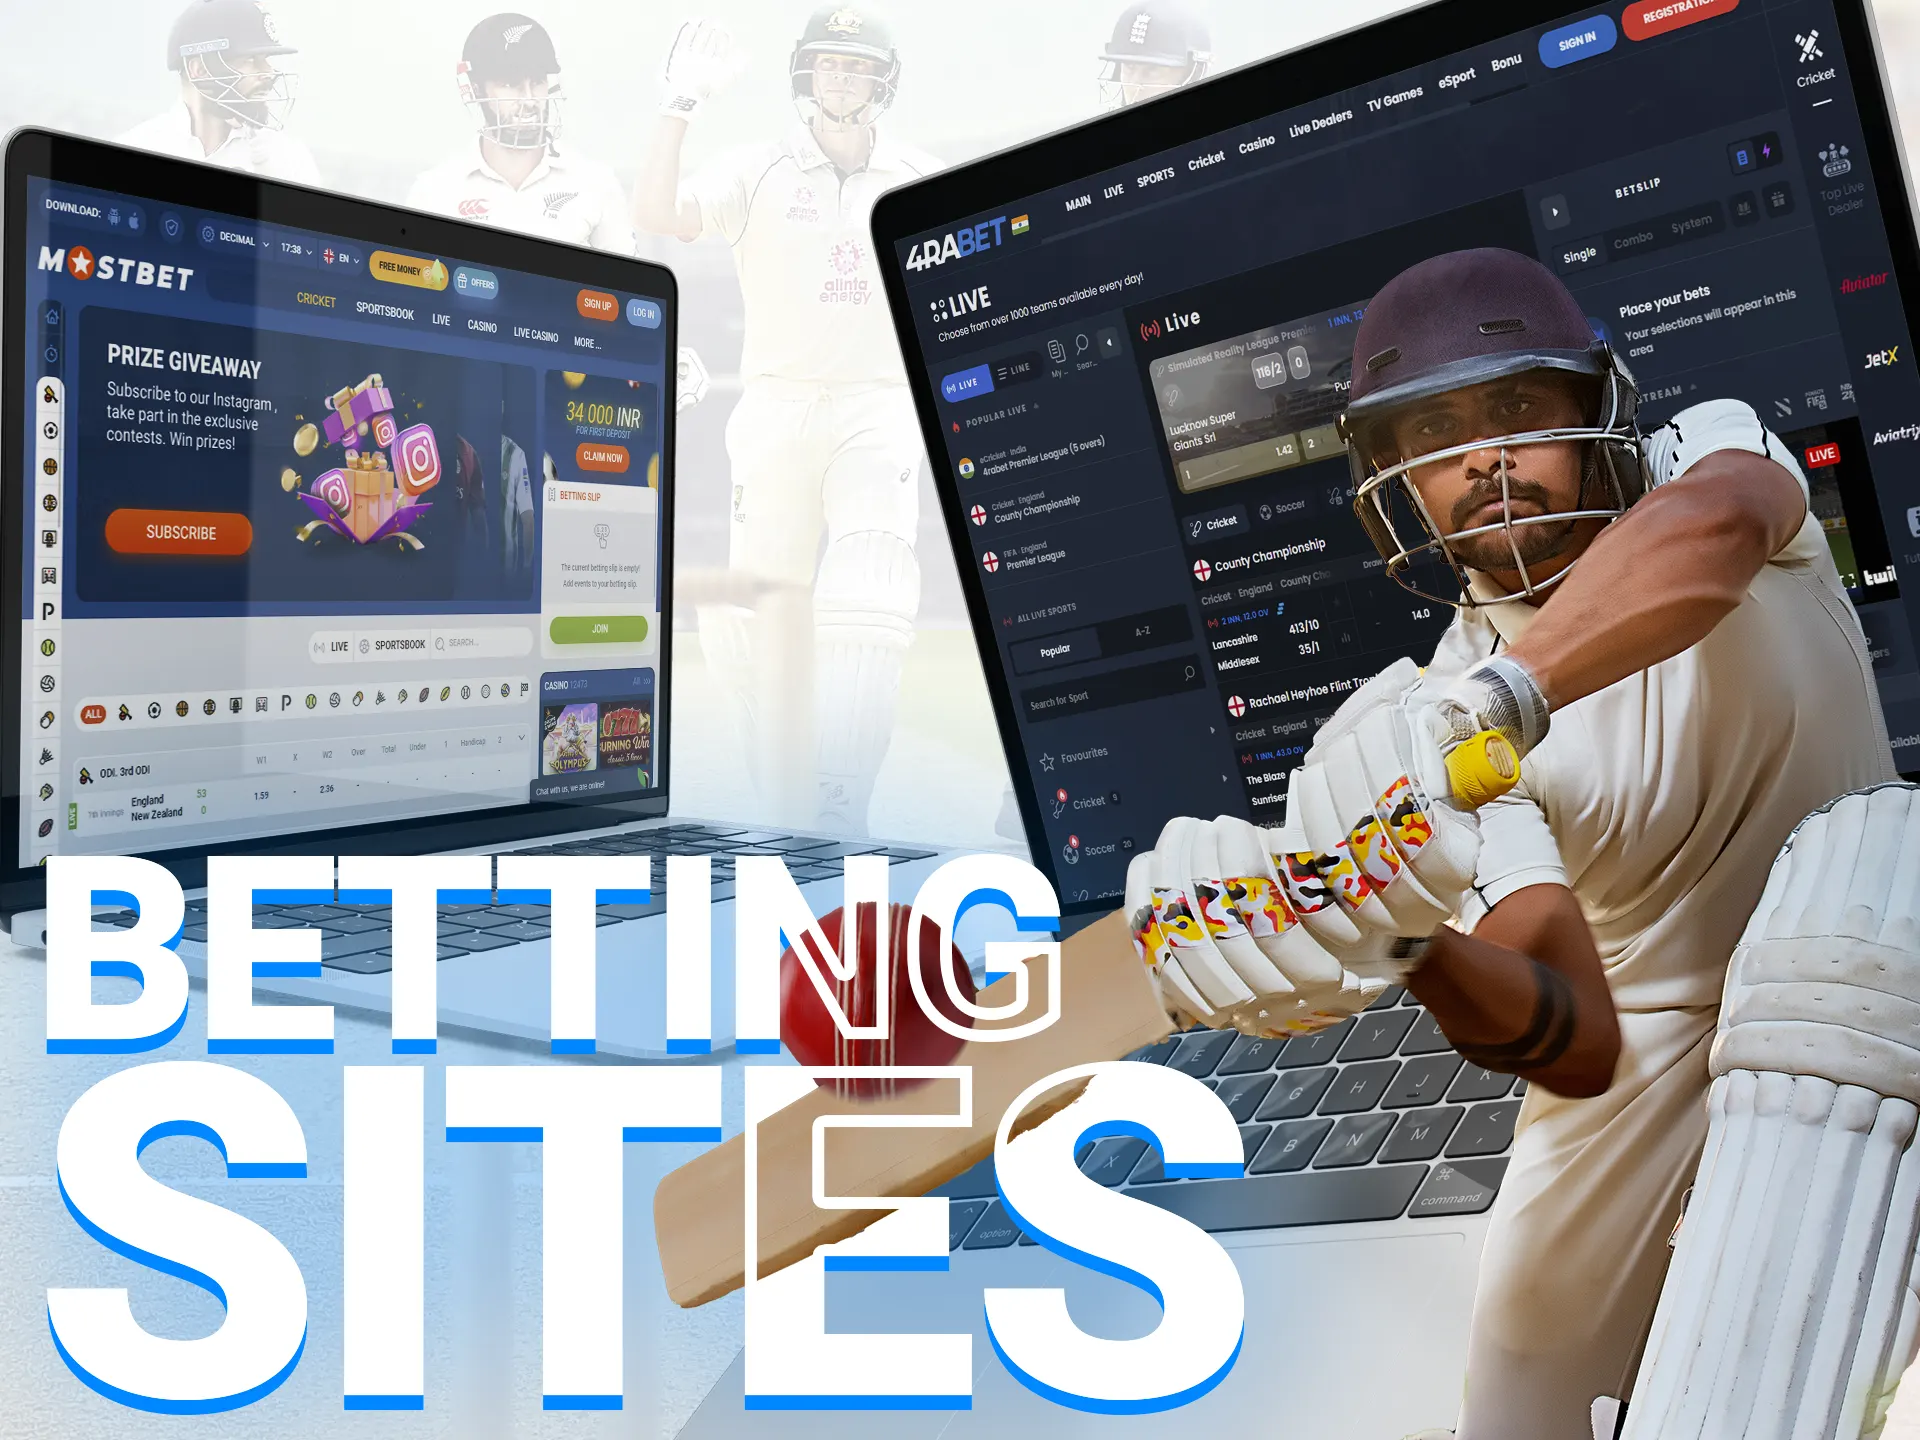 Many betting sites offer the ability to watch sports broadcasts and simultaneously place bets on the same page.